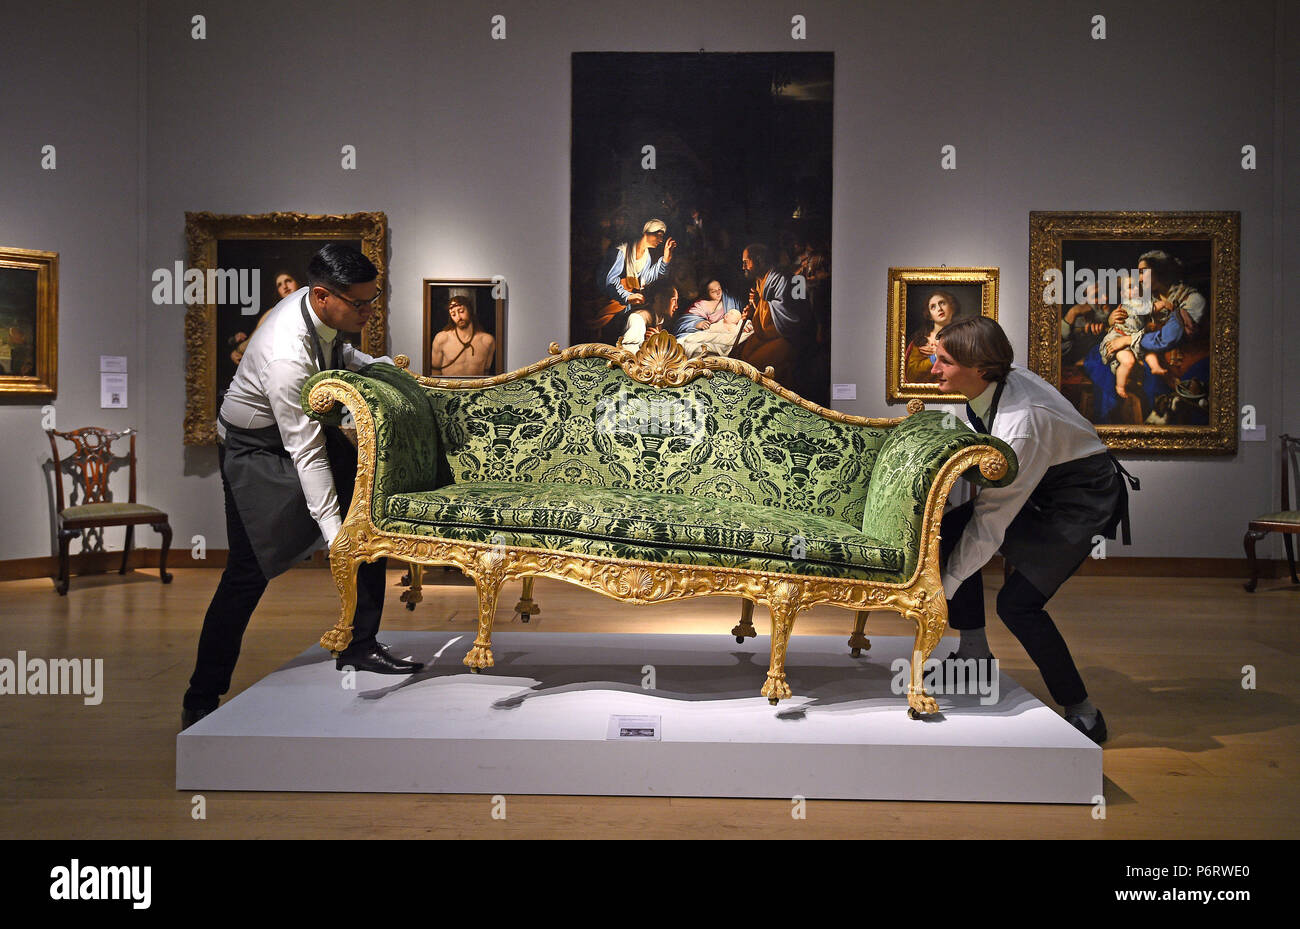 Gallery assistants adjust a George III Giltwood sofa, designed by Robert Adam and made by Thomas Chippendale, during a photocall for Christie's classic week sales, in London. Stock Photo